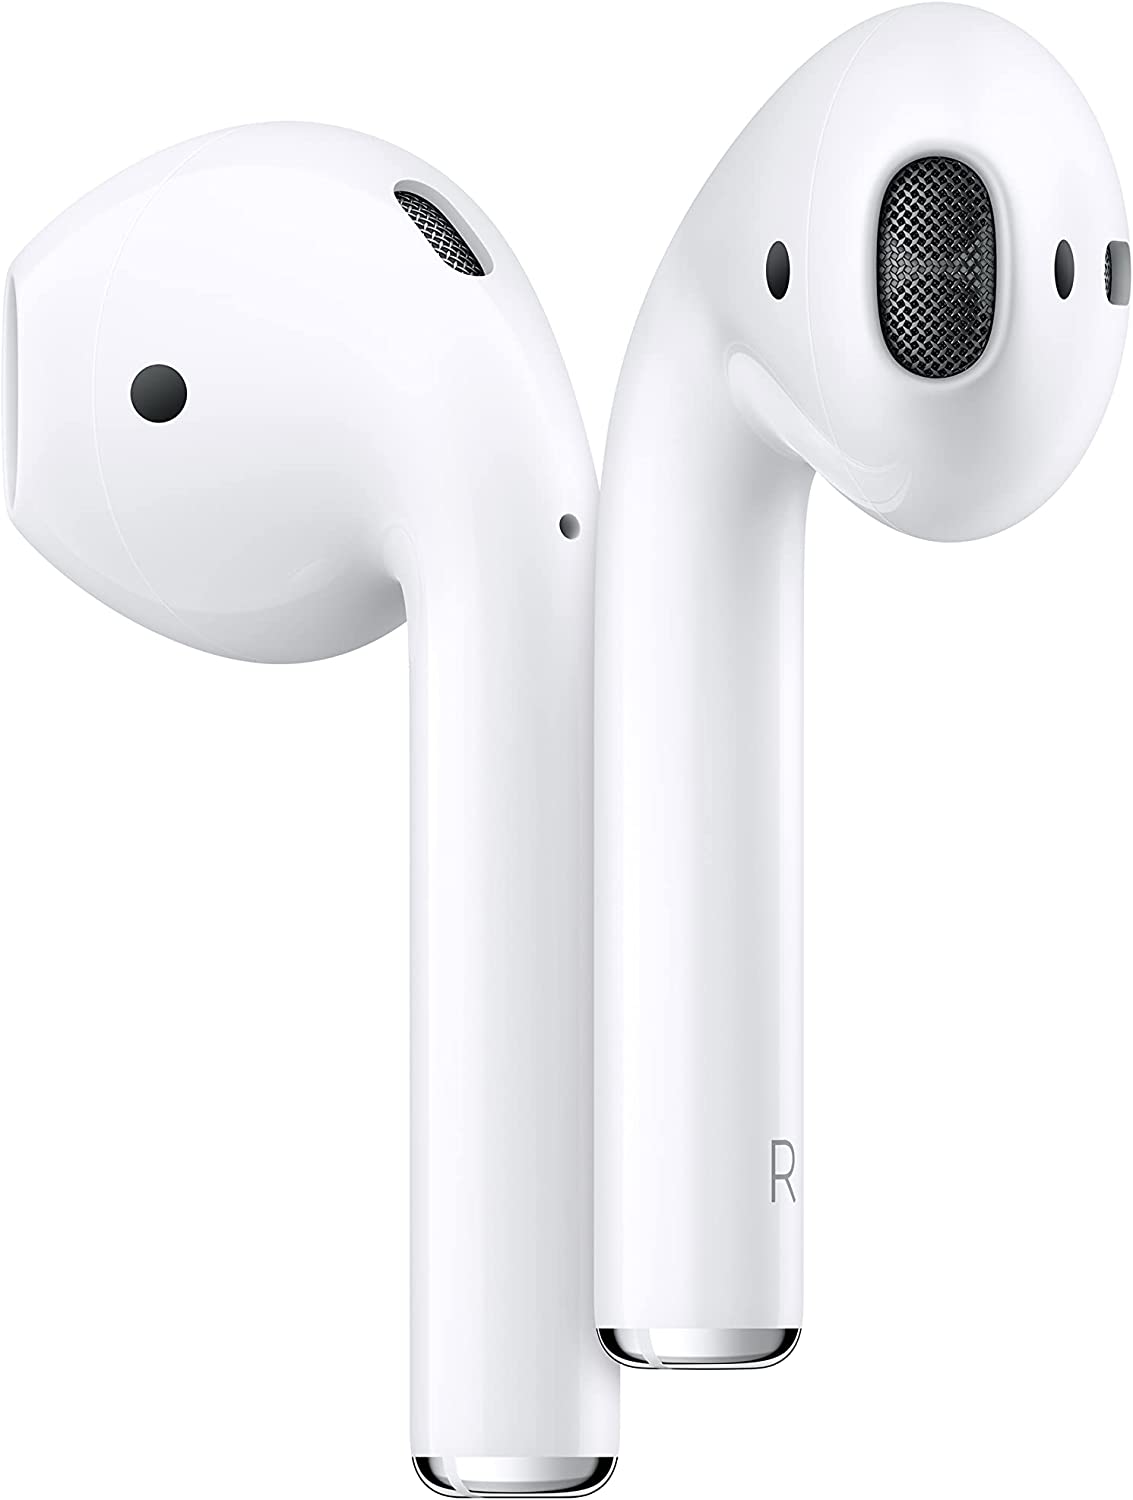 Apple AirPods and charging case 